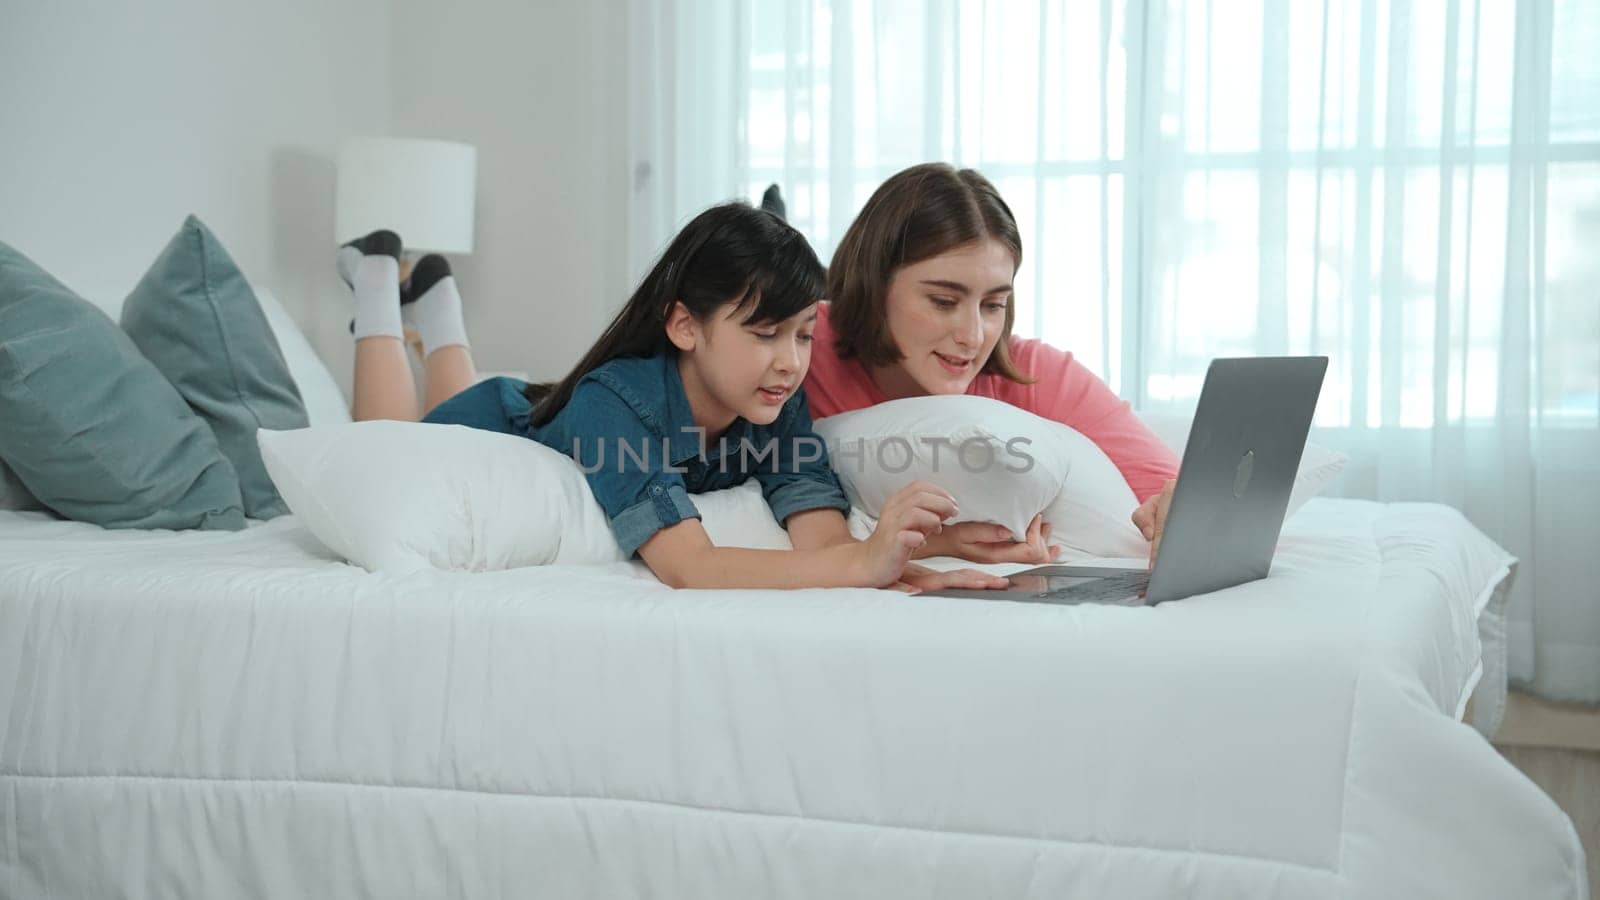 Attractive daughter and caucasian mother watching movie at laptop screen while lie on bad. Happy family spend time together before bed time. Parent and cute girl enjoy playing games together Pedagogy.